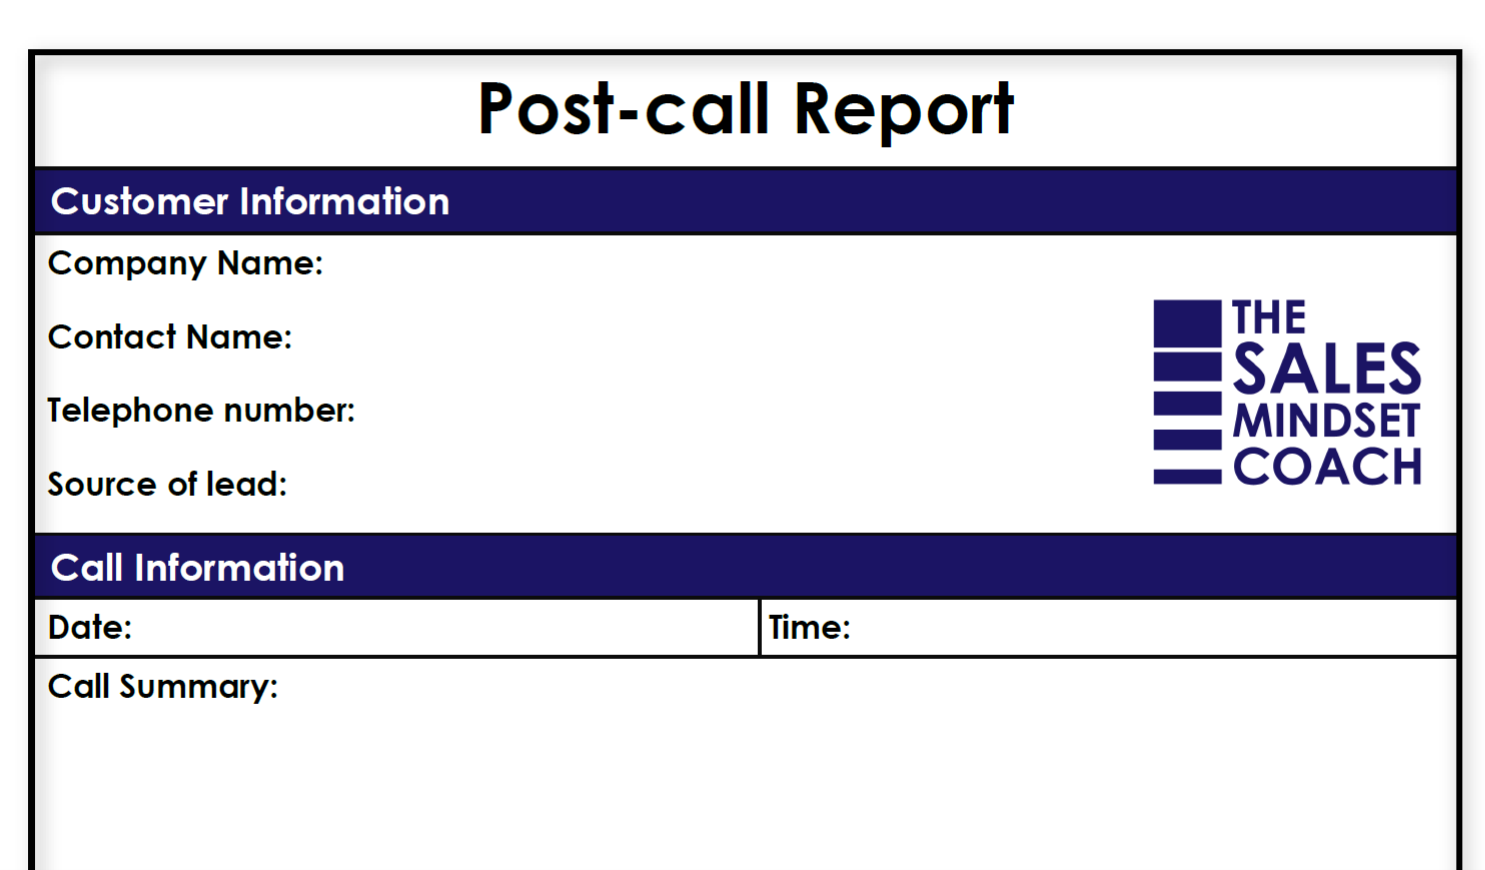 Post-call report template - The Sales Mindset Coach In Sales Call Report Template